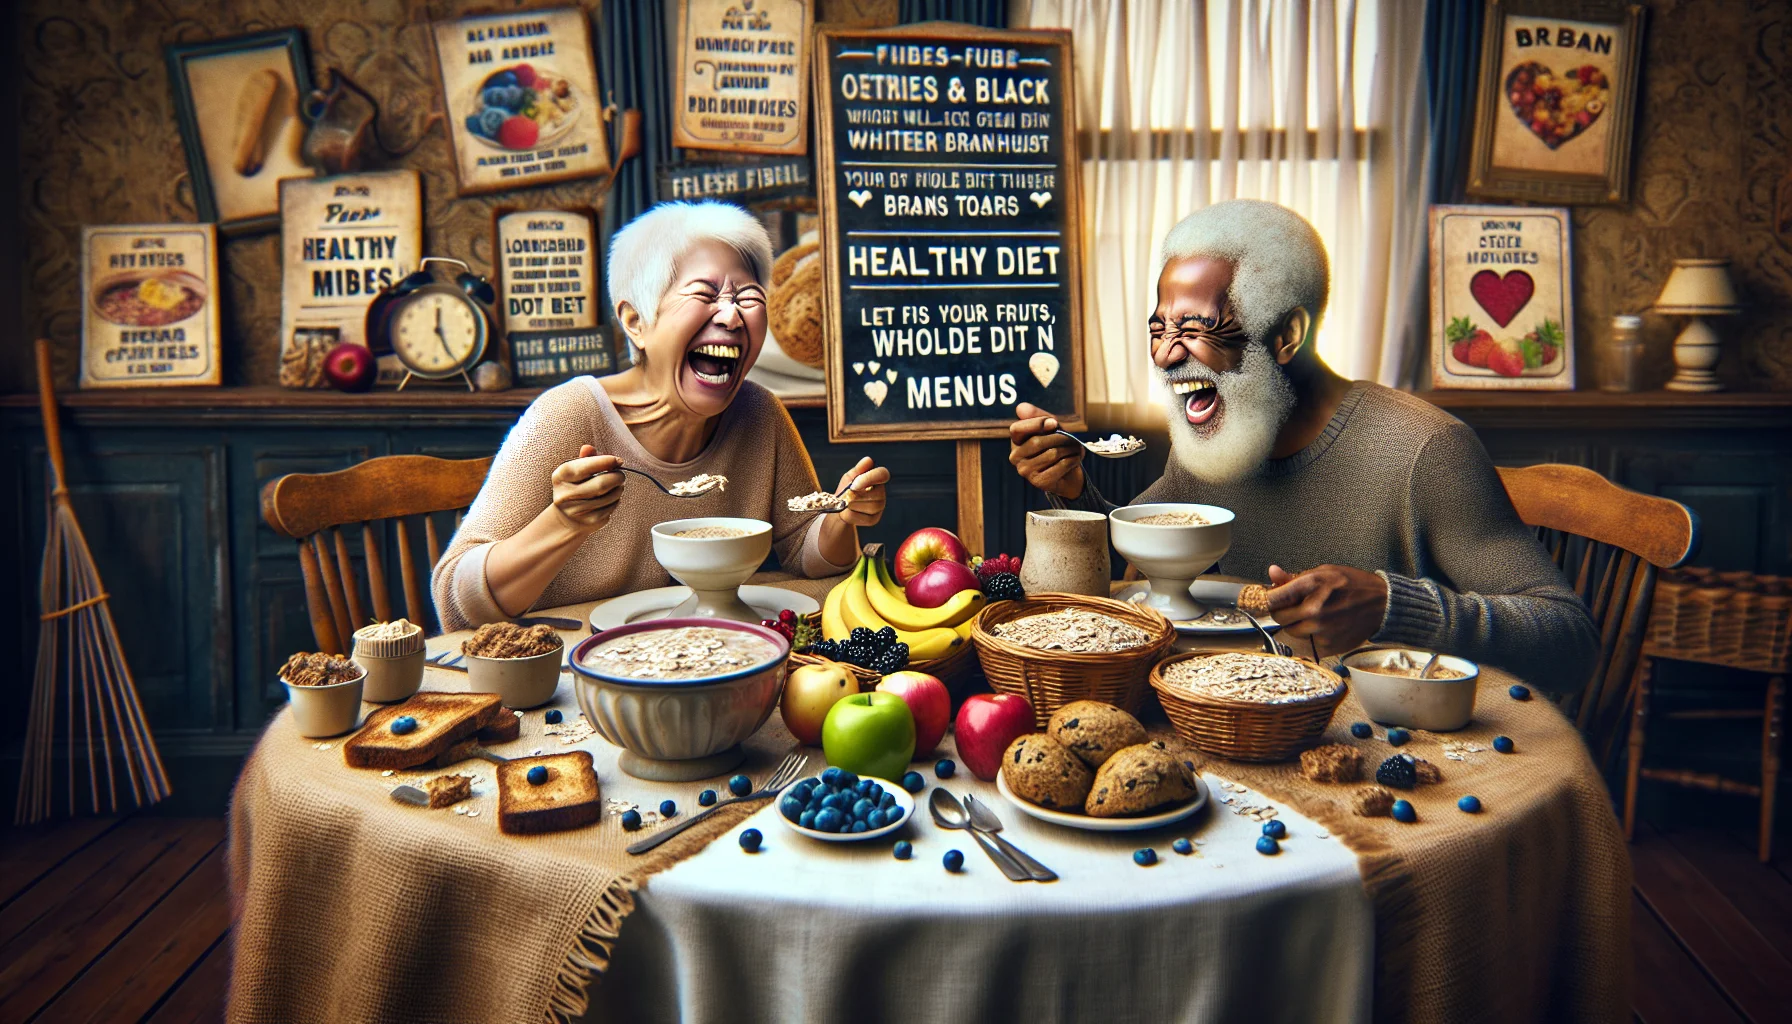 Create a humorous, realistic image capturing a scene around the breakfast table. Picture two aged individuals, one South Asian female and one Black male, both laughing uproariously while they indulge in a fiber-rich morning meal. The table is laden with bowls of oatmeal, plates of whole grain toasts, fresh fruits like apples, bananas, and berries, and baskets of bran muffins. Let the ambiance reflect their interior home, decorated in an old-fashioned style hinting at their love of antiques. Introduce visible signage displaying healthy diet tips and menus sprinkled throughout the space to emphasize the theme of healthy eating.